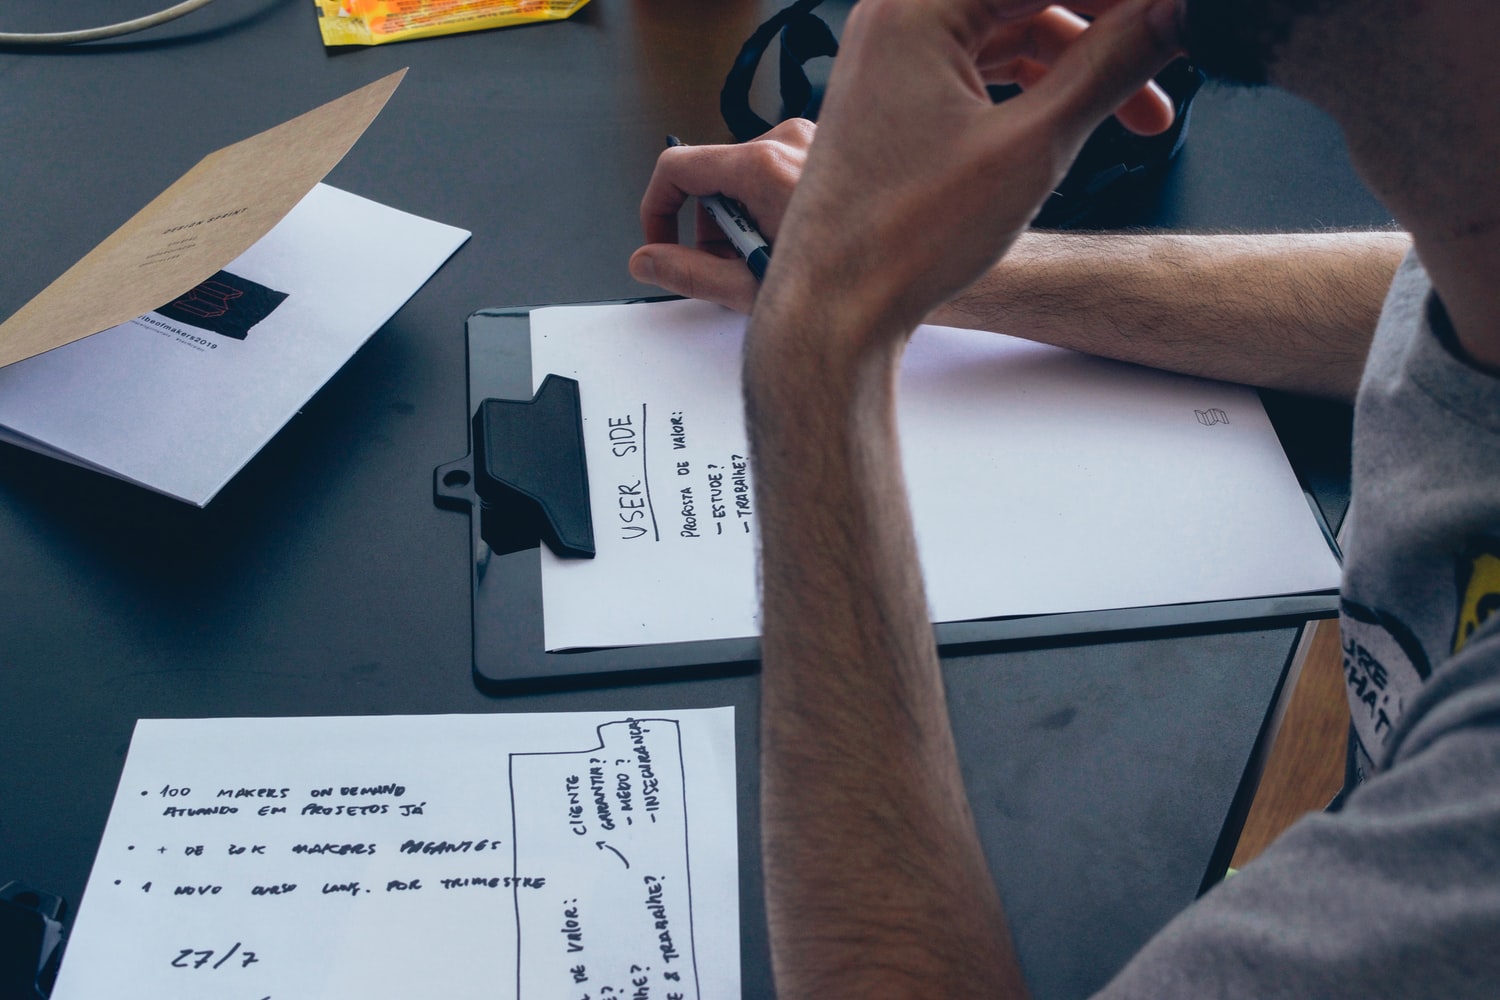 A design agency for startups working on defining user personas